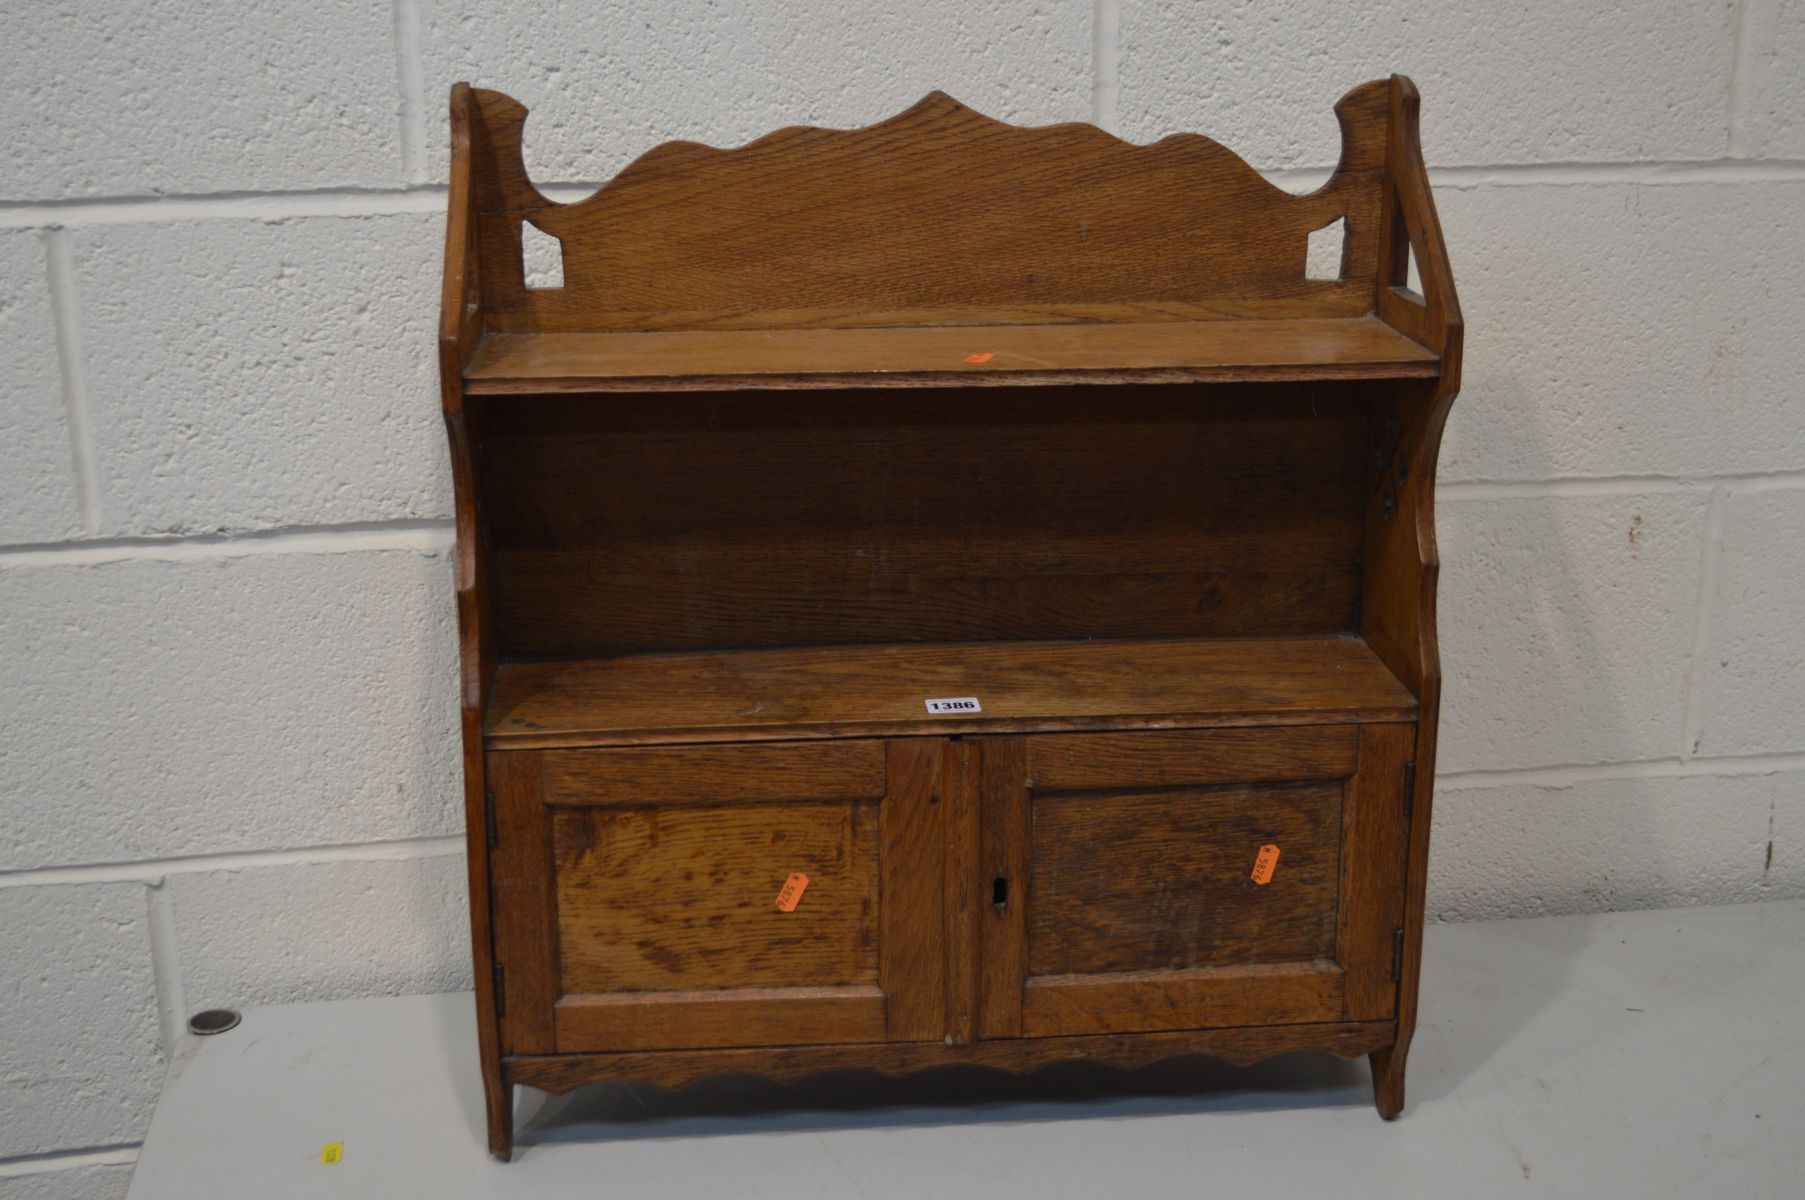 AN EARLY 20TH CENTURY OAK ARTS AND CRAFTS HANGING BOOKSHELF with a two door cupboard